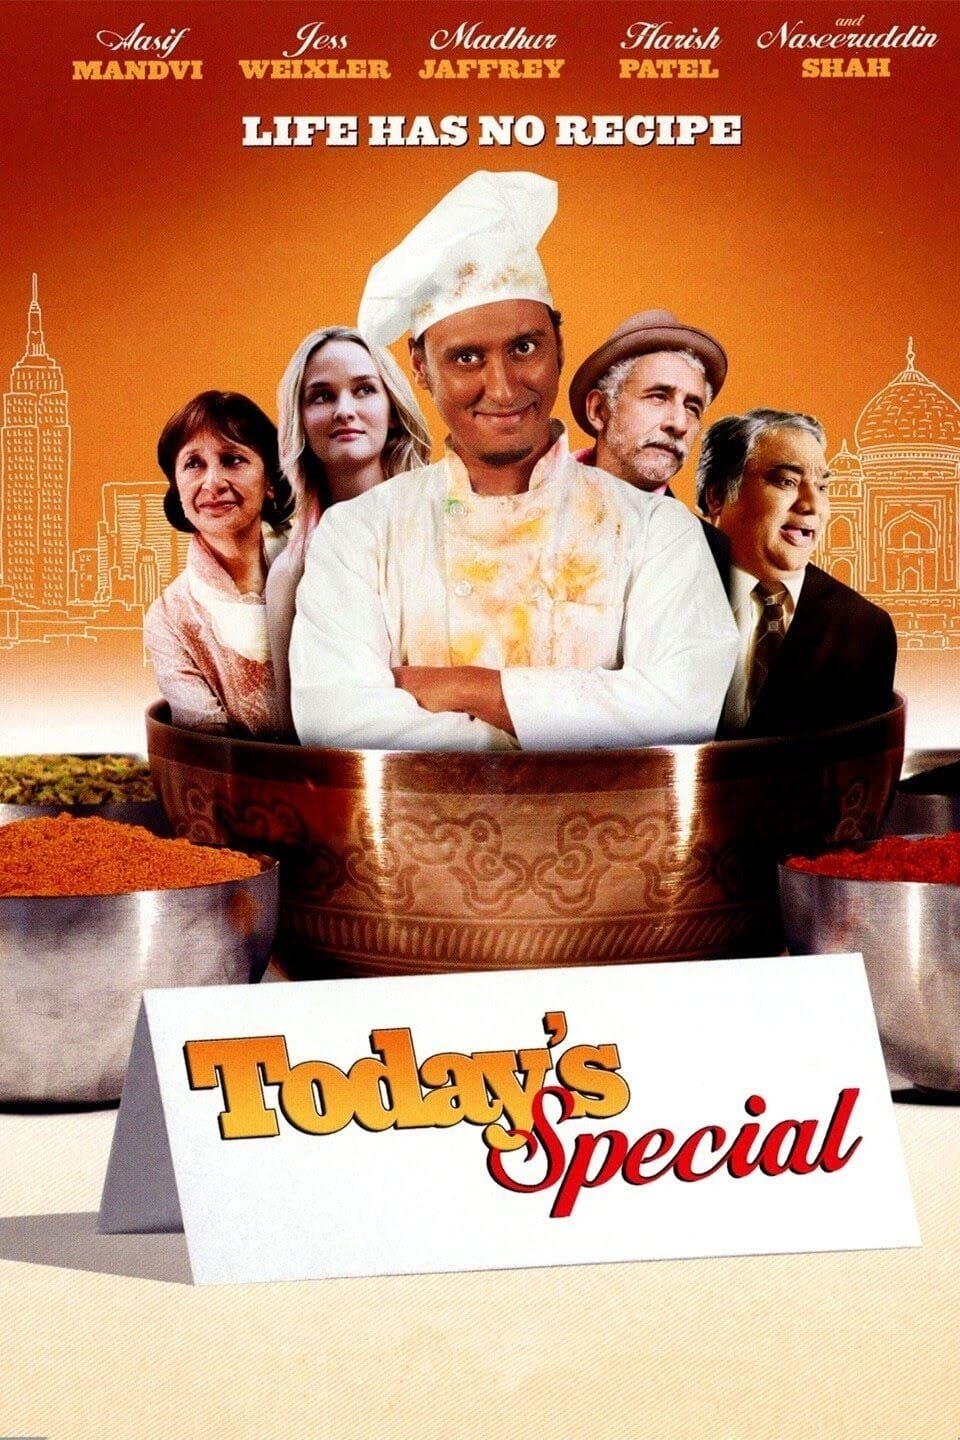 Today's Special (2009)